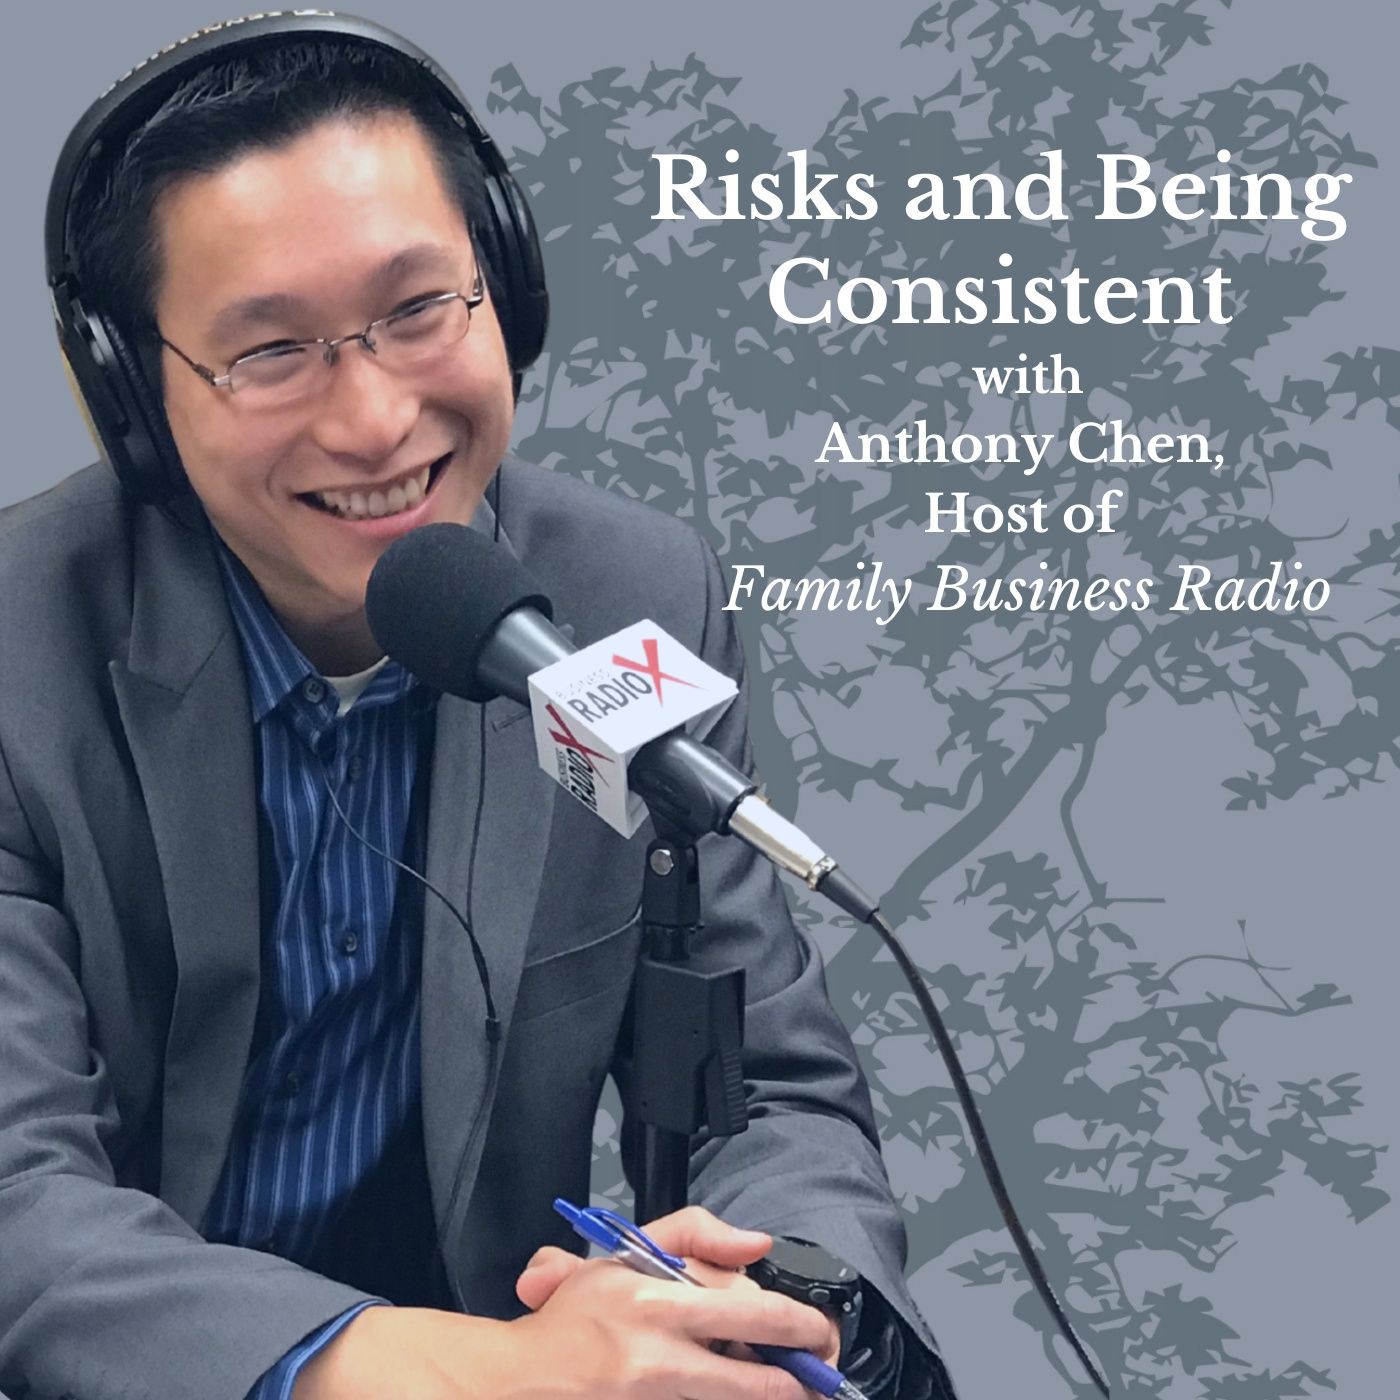 Risks and Being Consistent, with Anthony Chen, Host of Family Business Radio